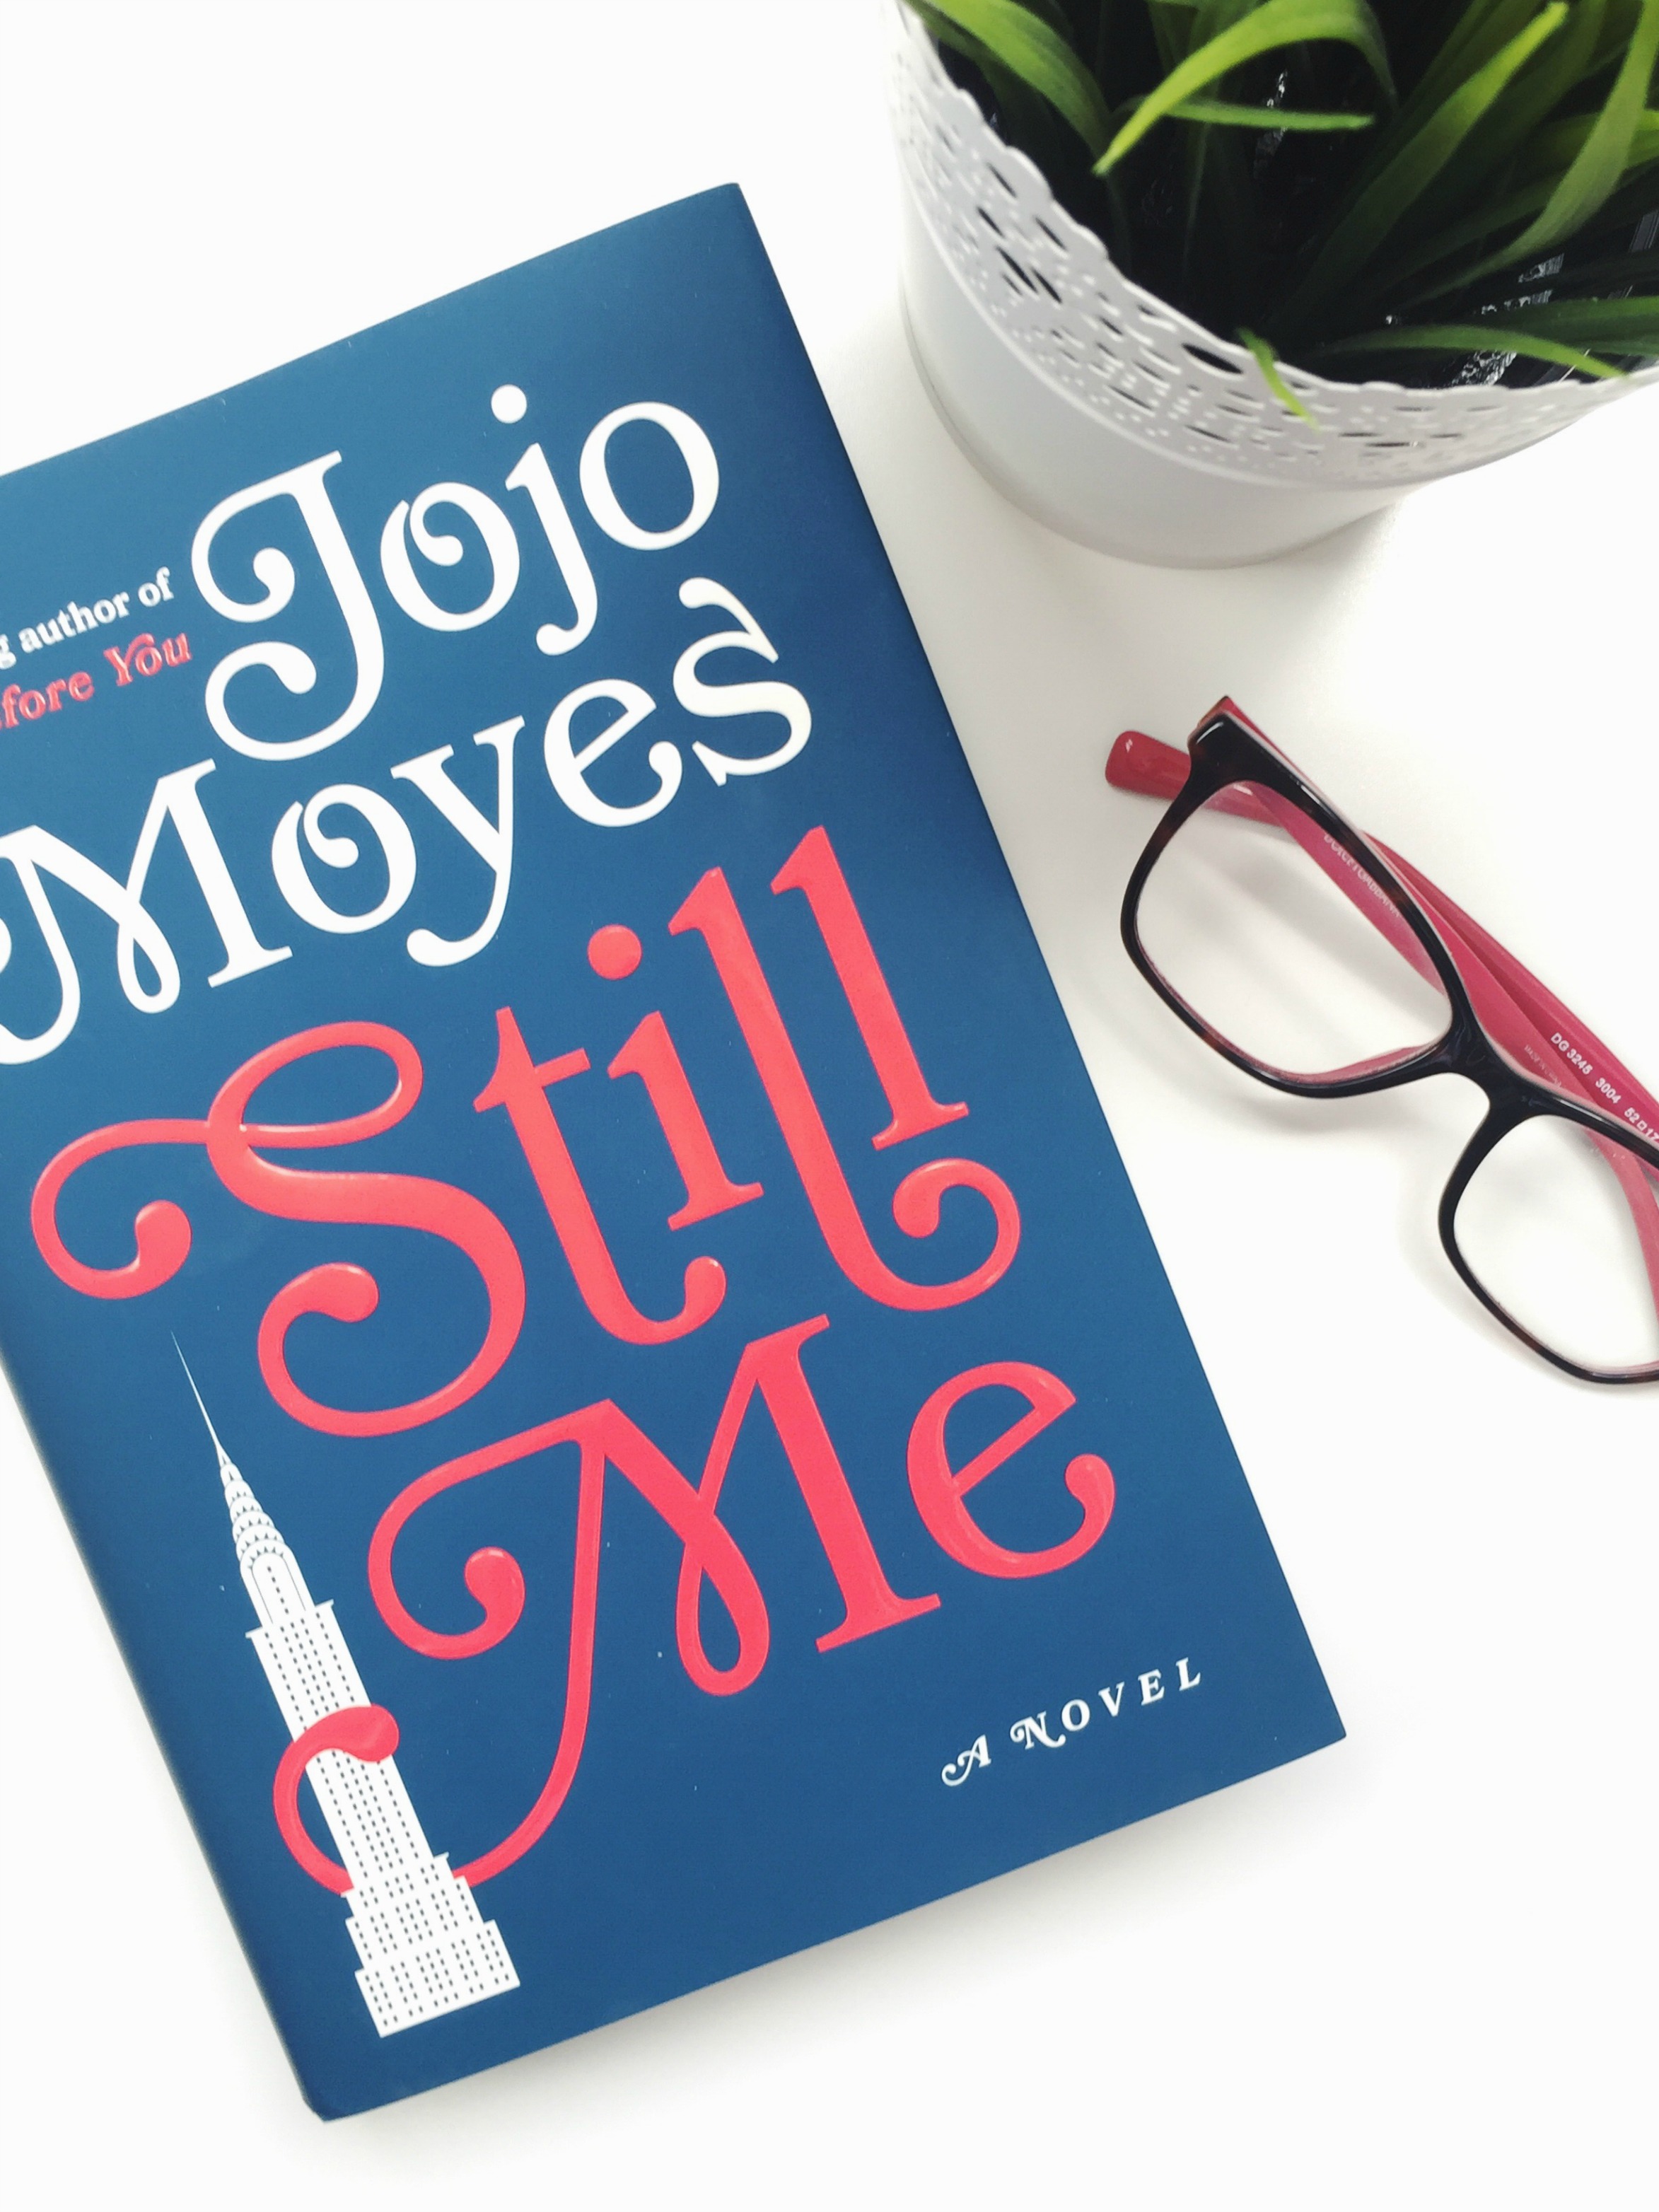 still with you book review